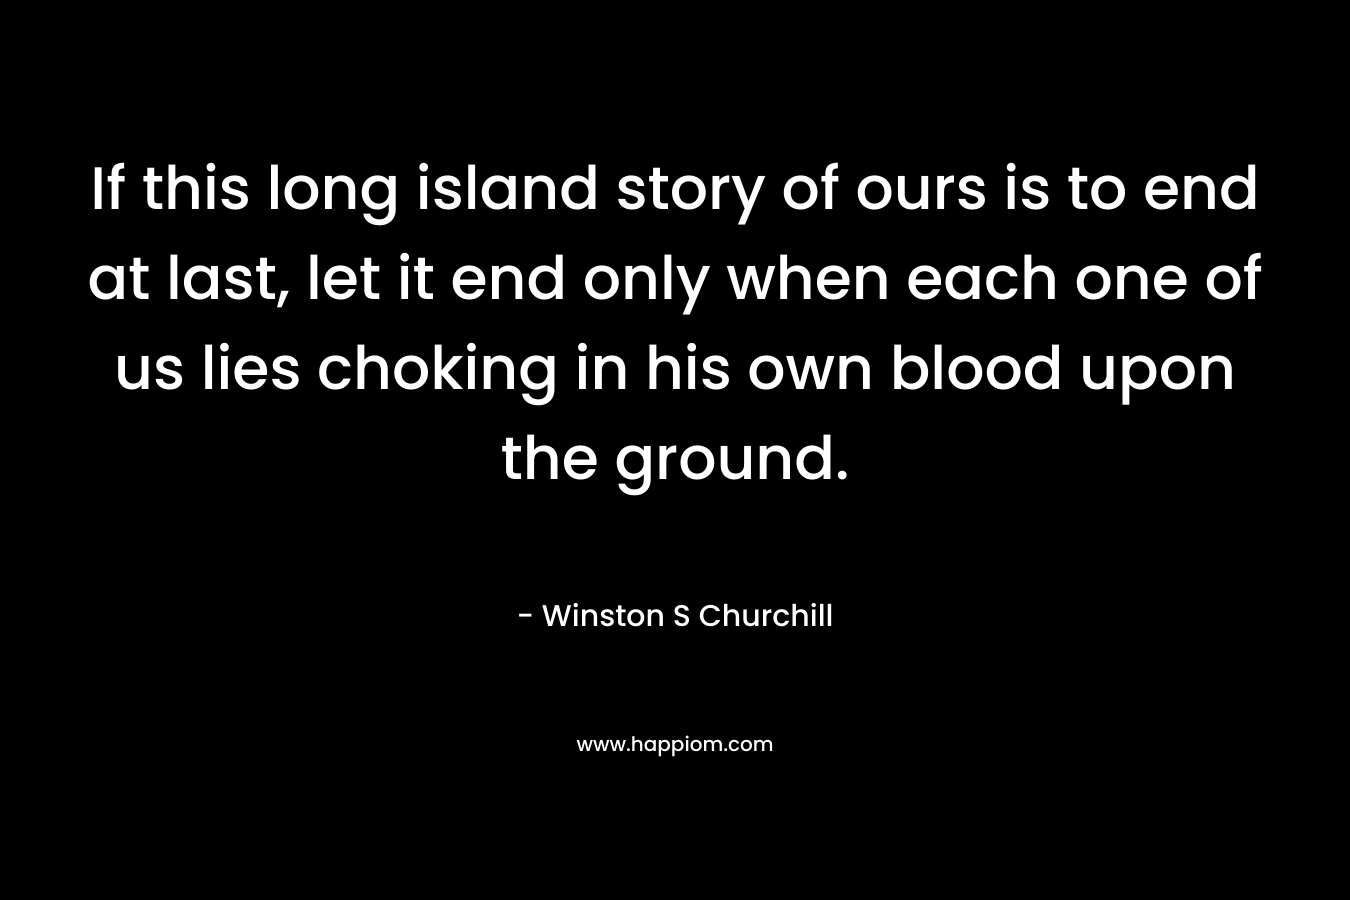 If this long island story of ours is to end at last, let it end only when each one of us lies choking in his own blood upon the ground. – Winston S Churchill